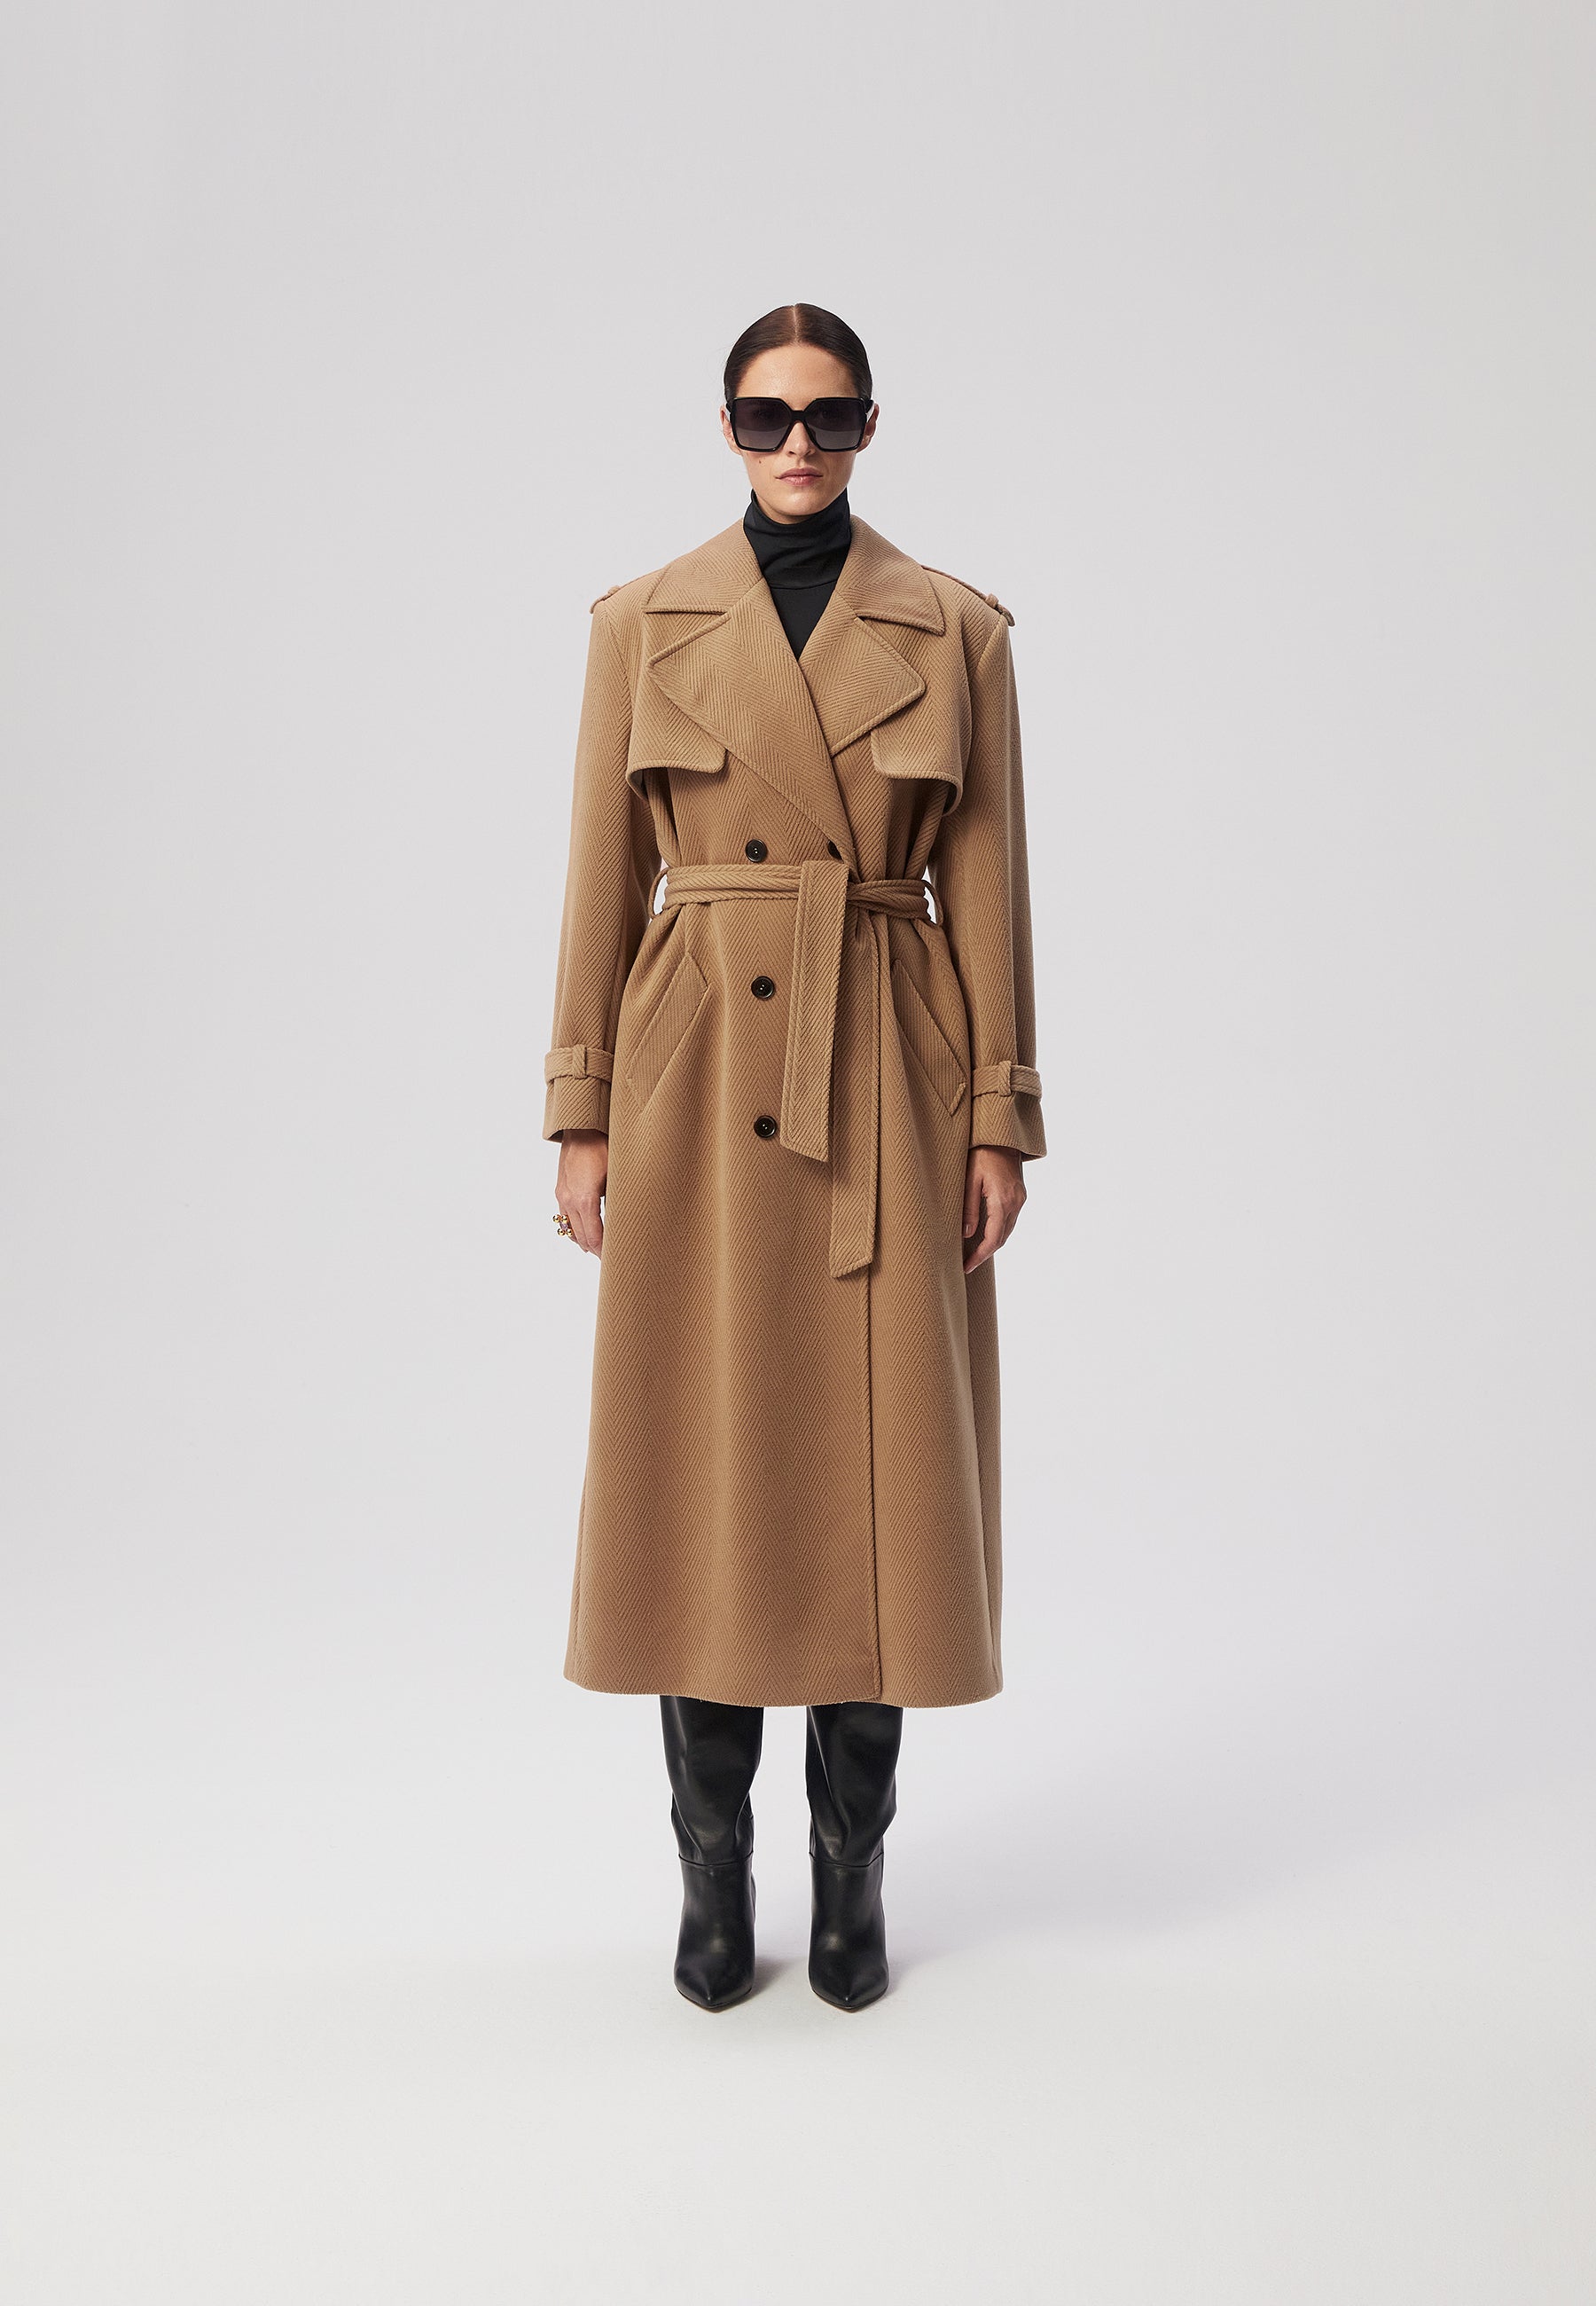 CHIANTE double-breasted oversized coat, brown